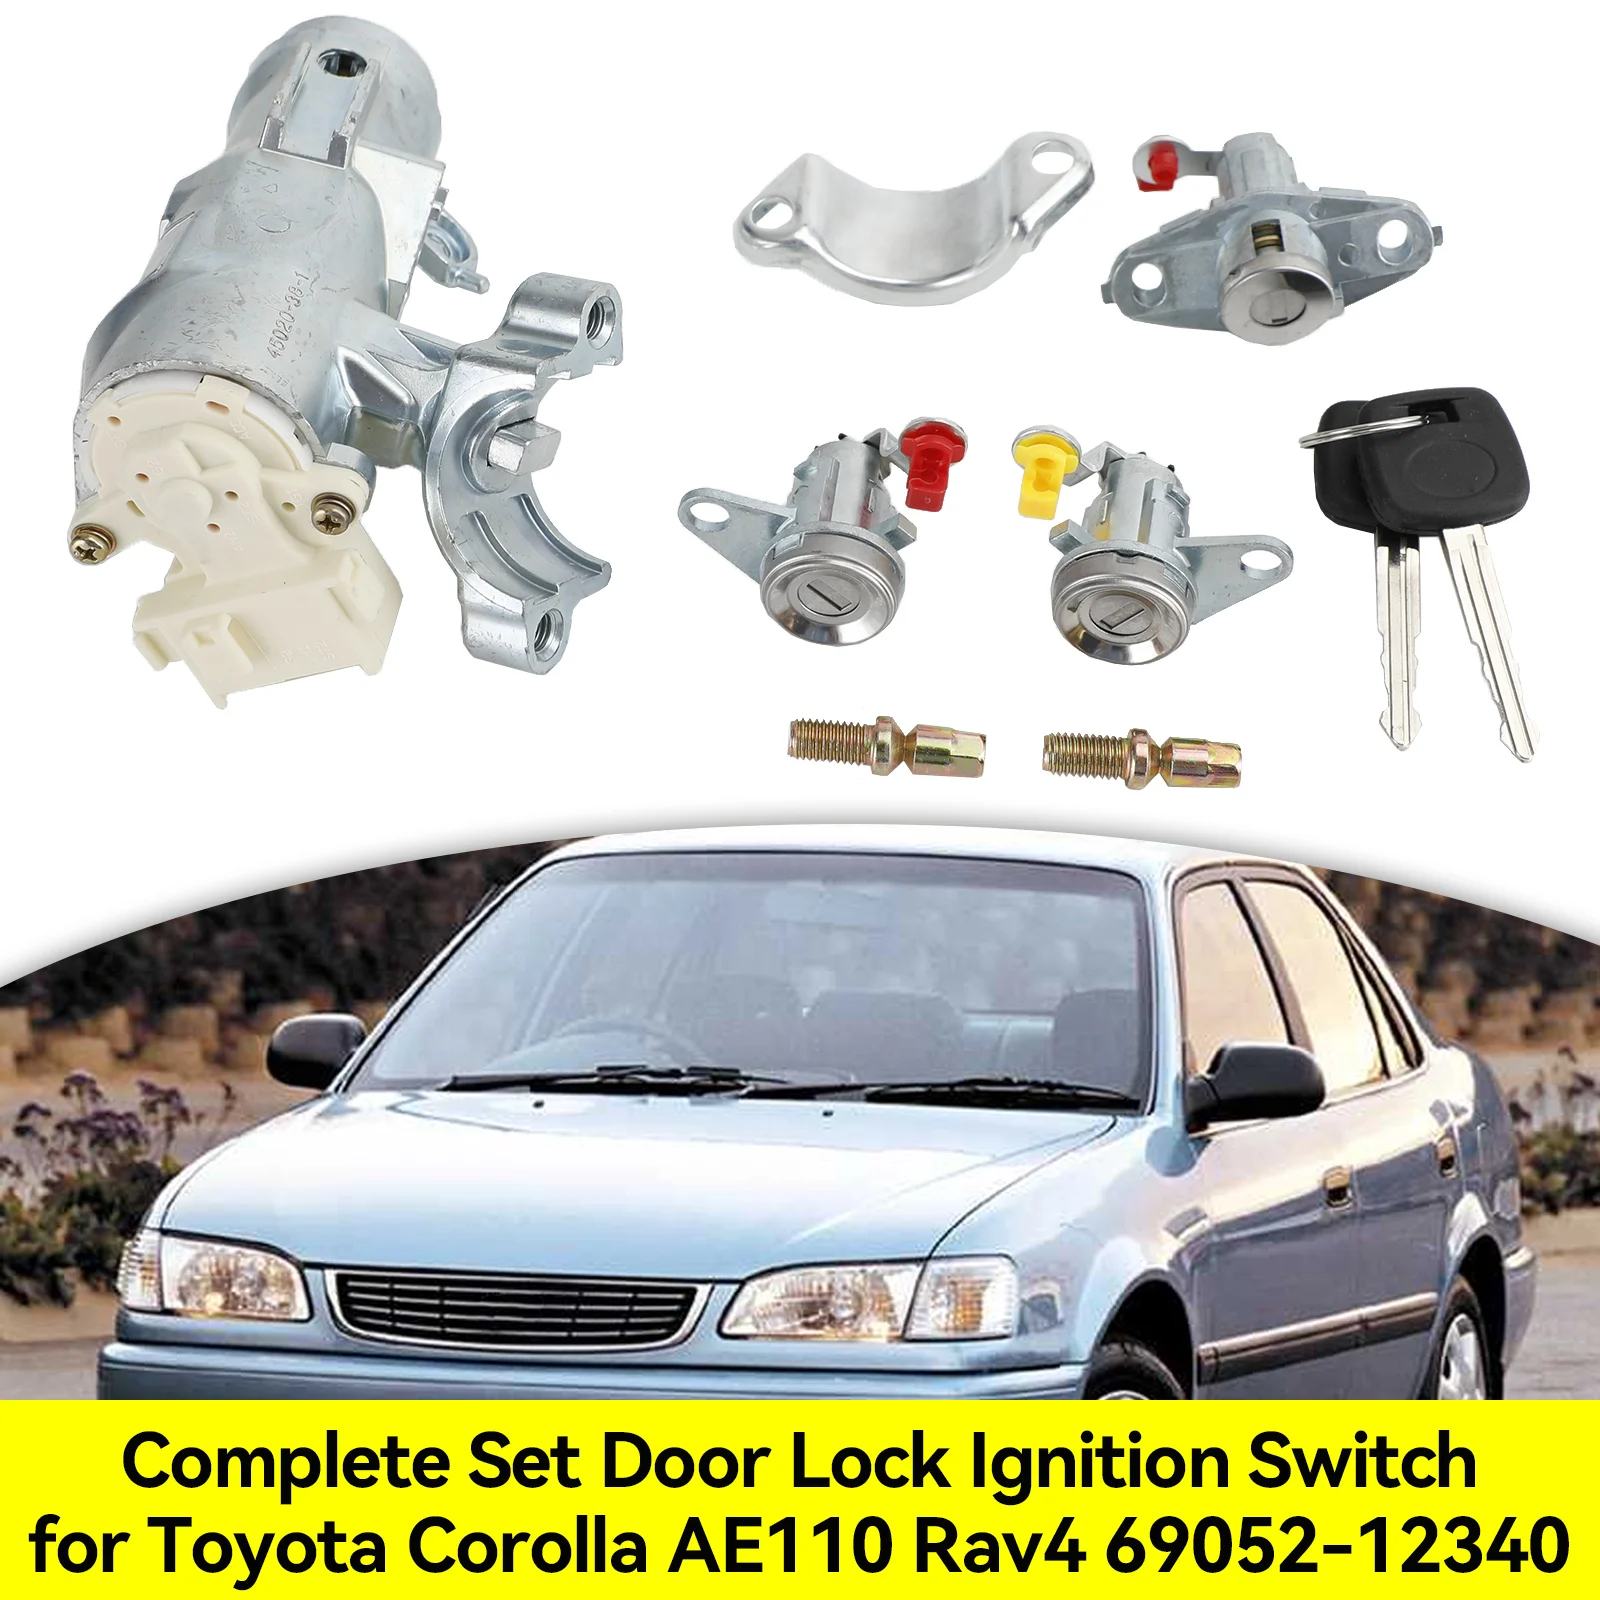 

Areyourshop Complete Set Door Lock Ignition Switch for Toyota Corolla AE110 Rav4 69052-12340 car accessories